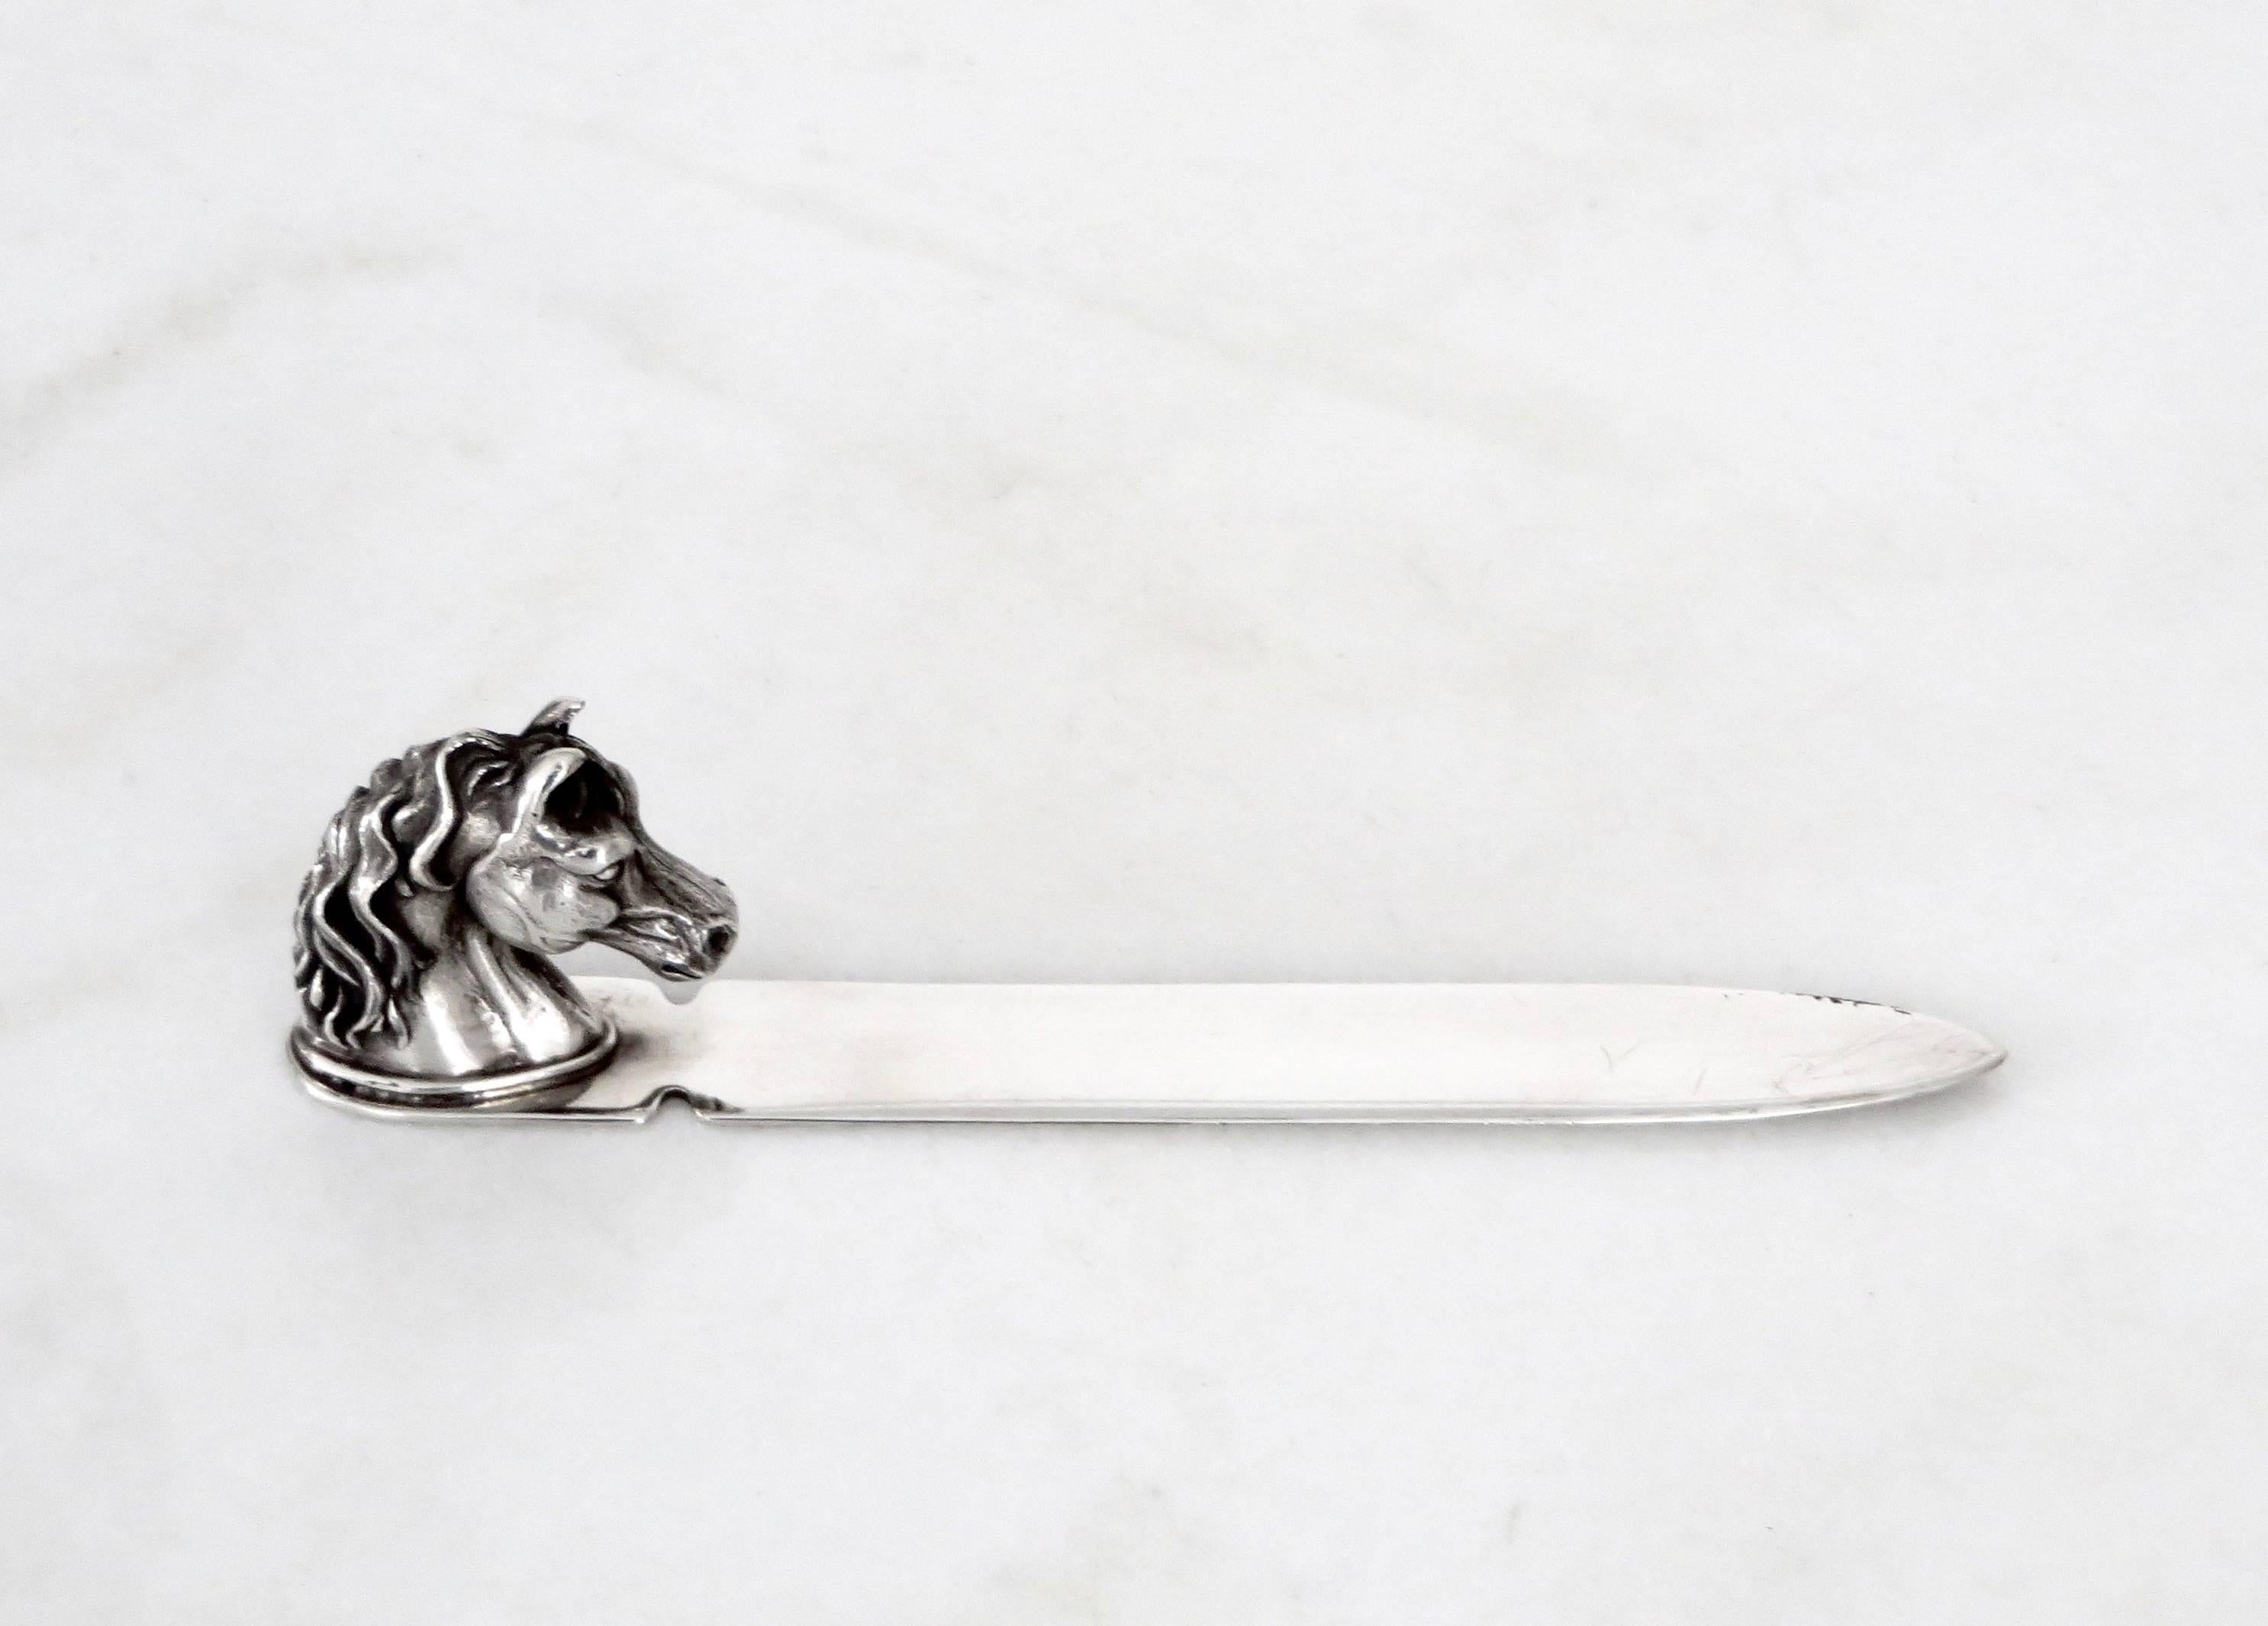 American Reed and Barton Silver Plate Letter Opener Featuring a Horse Head